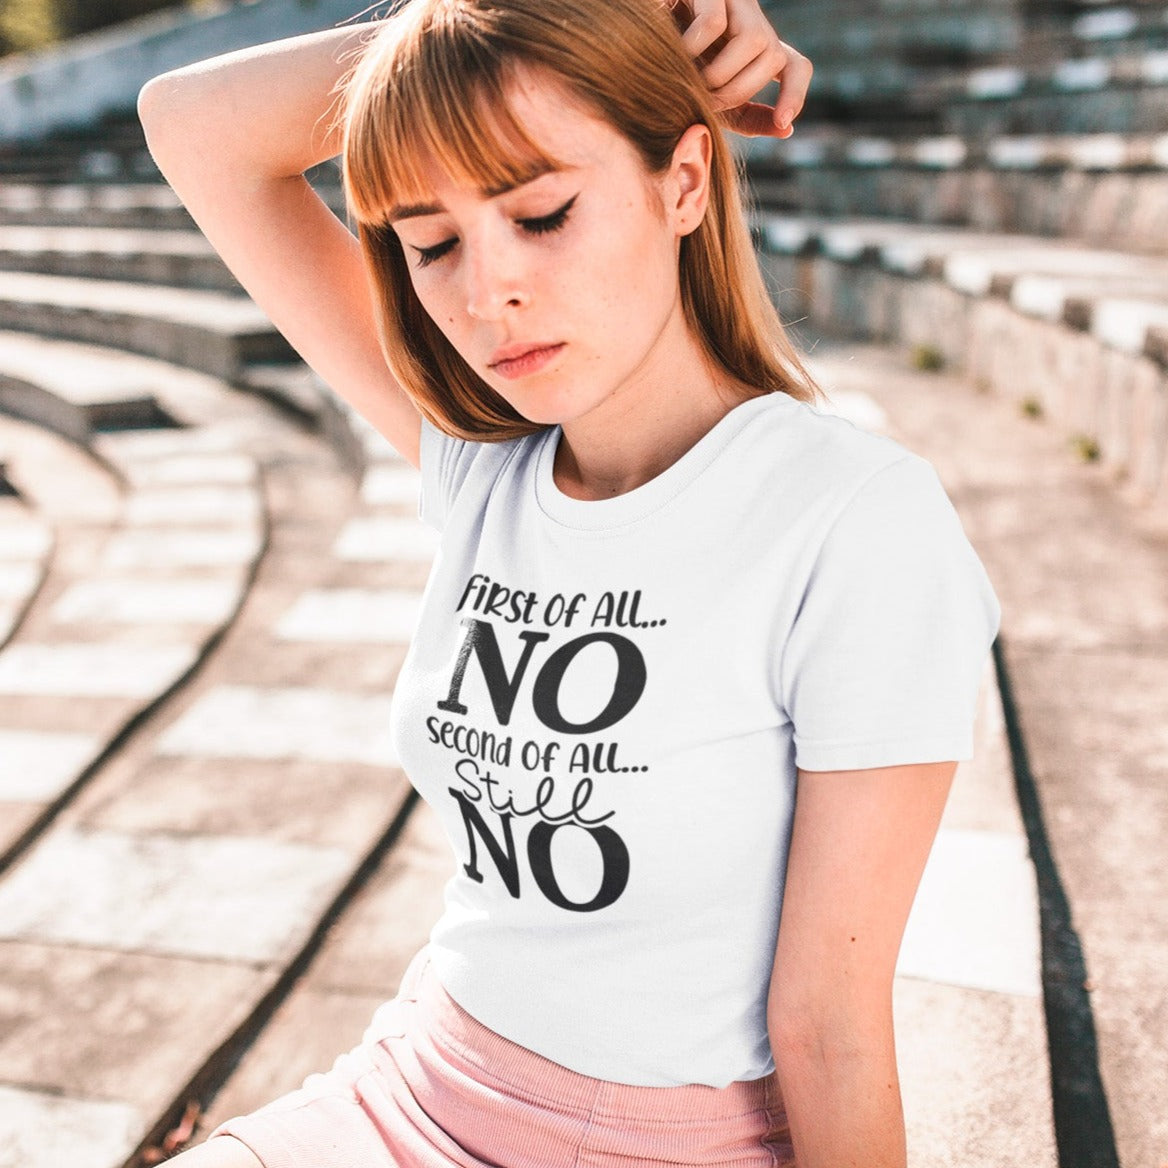 first-of-all-no-second-of-all-no-white-t-shirt-sarcastic-women-mockup-of-a-pretty-girl-wearing-a-tee-and-posing-in-an-empty-stadium